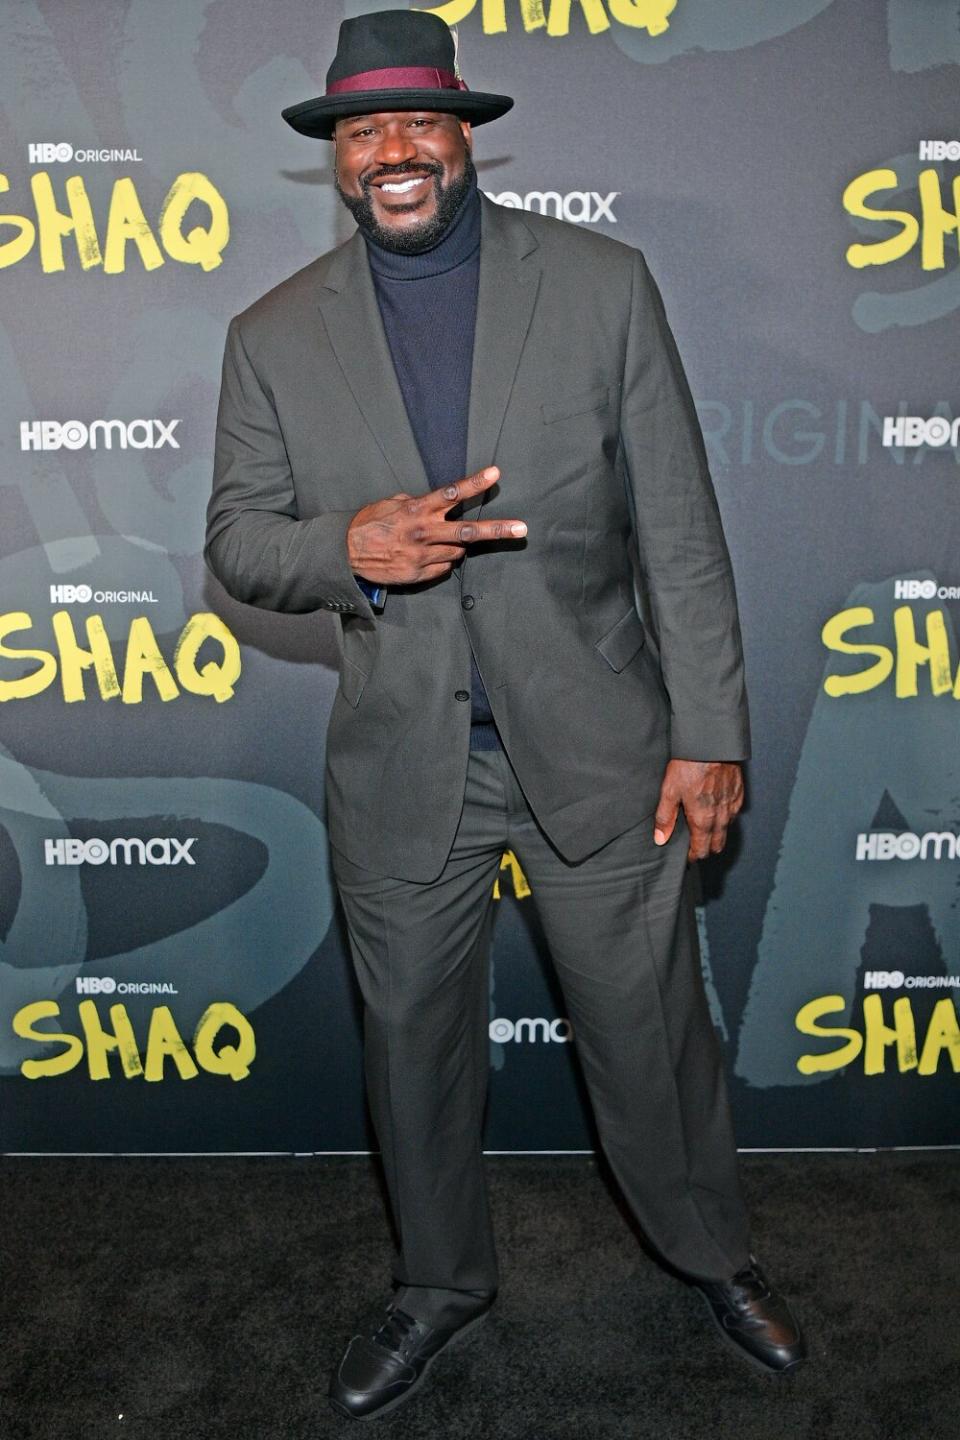 Shaquille O'Neal attends the HBO premiere of the four-part documentary SHAQ.  November 14, 2022 at her Illuminarium in Atlanta, Georgia.  (Photo by Prince Williams/Wireimage)